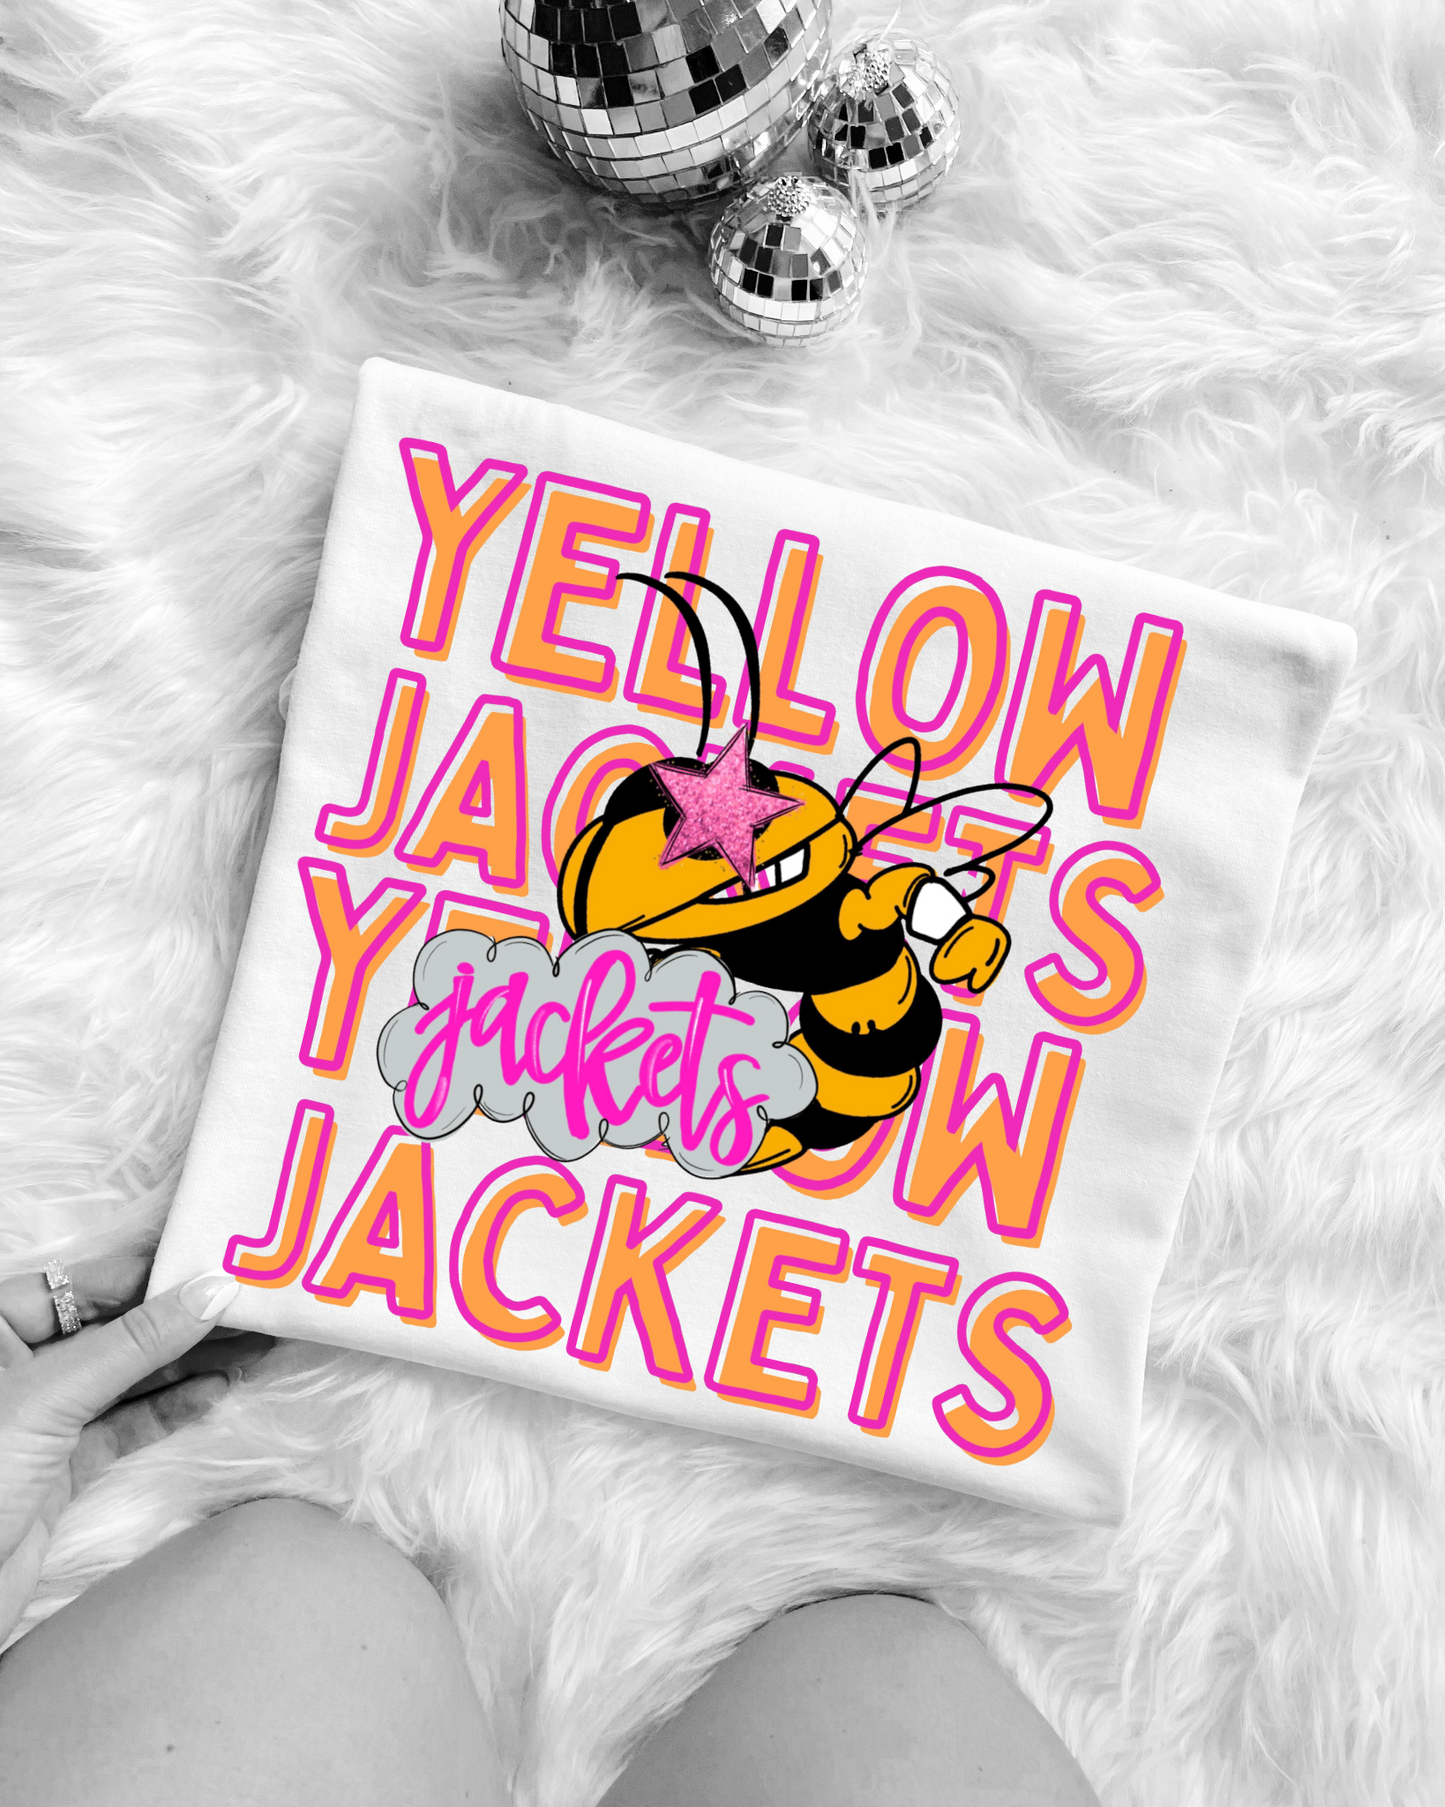 Yellowjackets Preppy Mascot Gameday Graphic T-Shirt Design DIGITAL DOWNLOAD FILE PNG